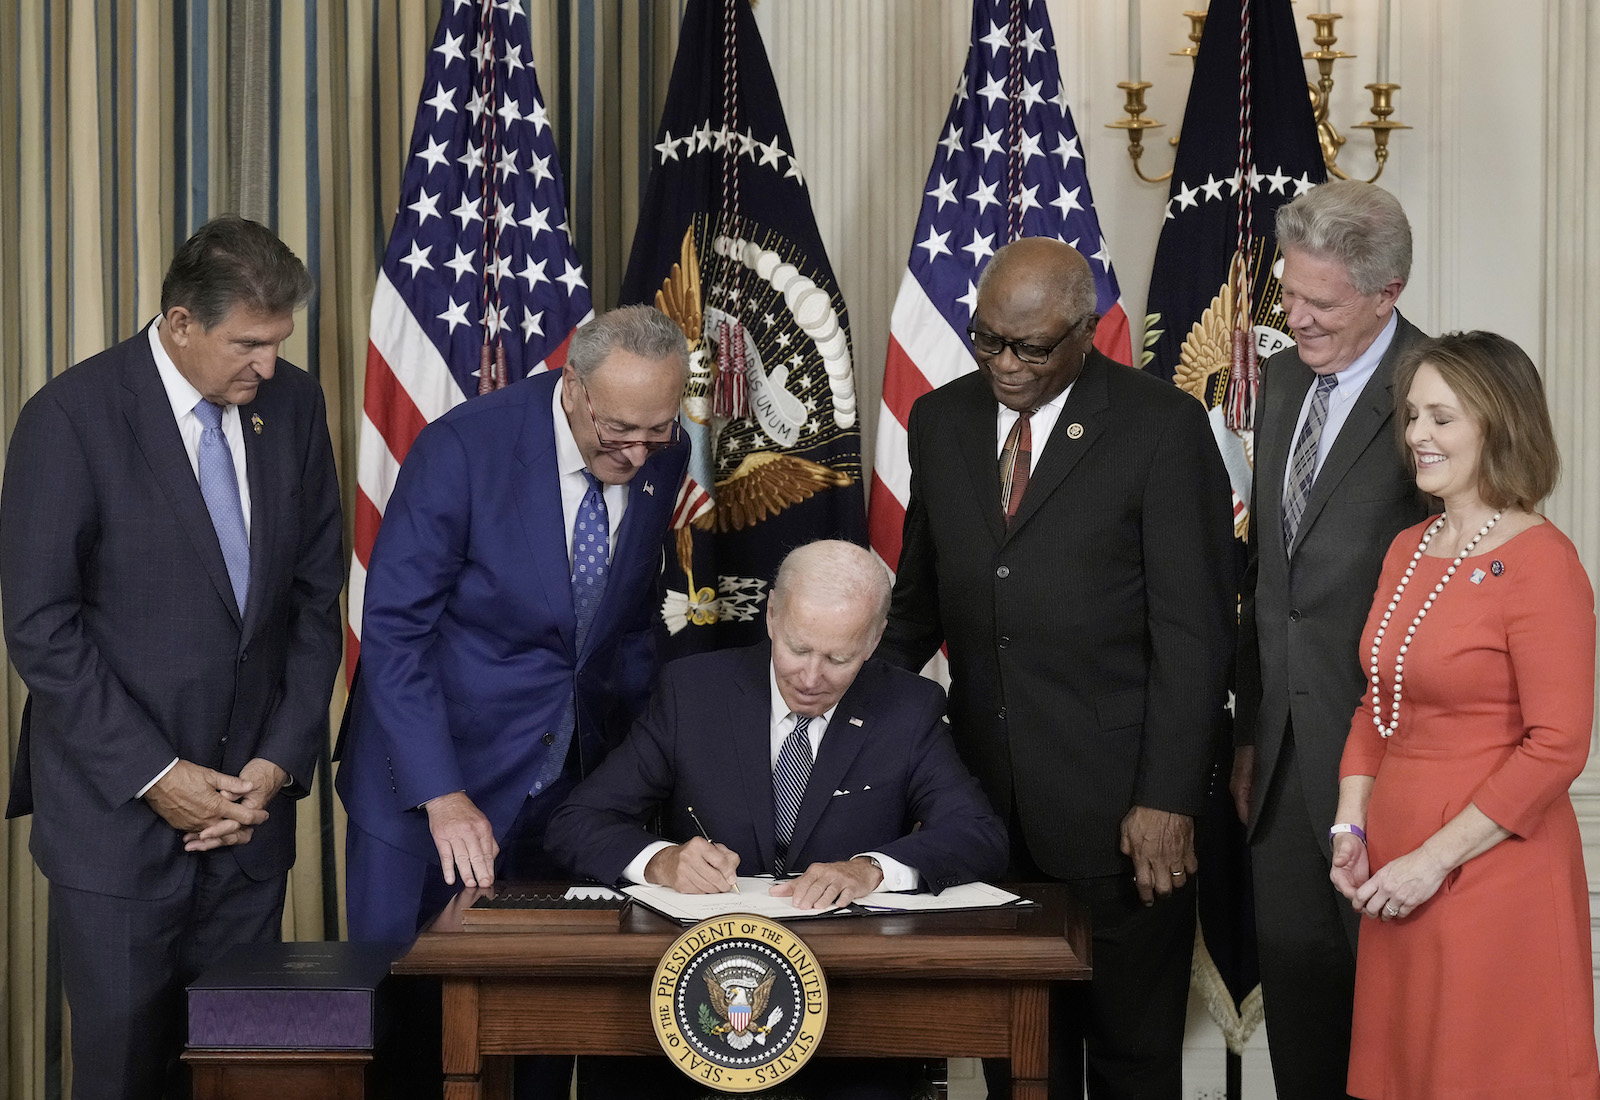 Biden signs the Inflation Reduction Act into law | Grist